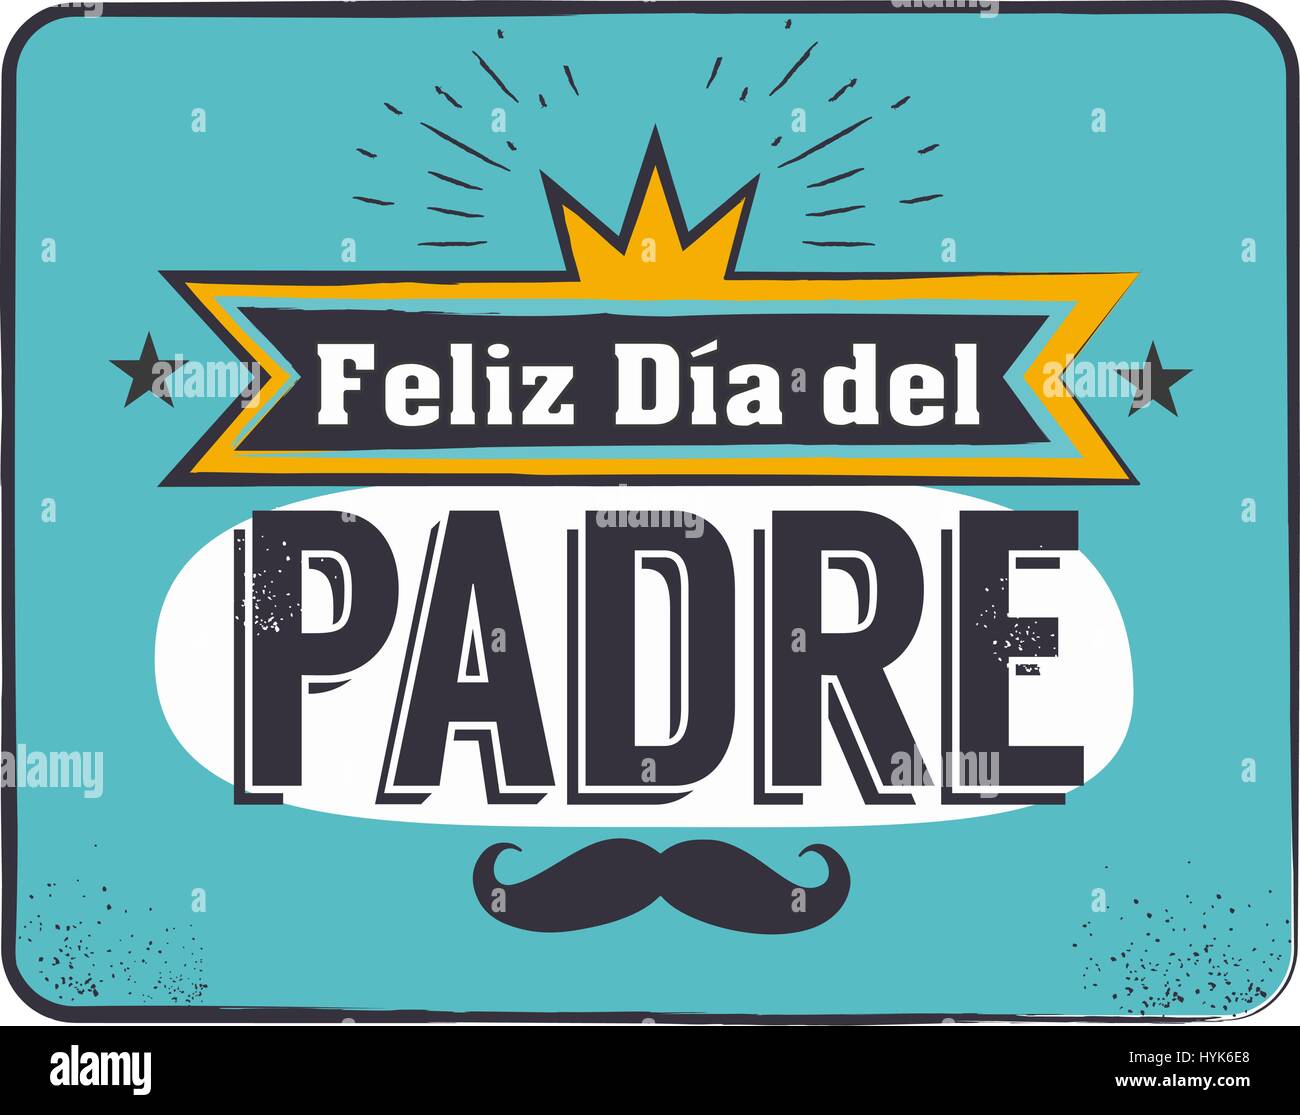 The best Dad in the World - World s best dad - spanish language. Happy fathers day - Feliz dia del Padre - quotes. Congratulation card, label, badge vector. Mustache, stars elements Stock Vector